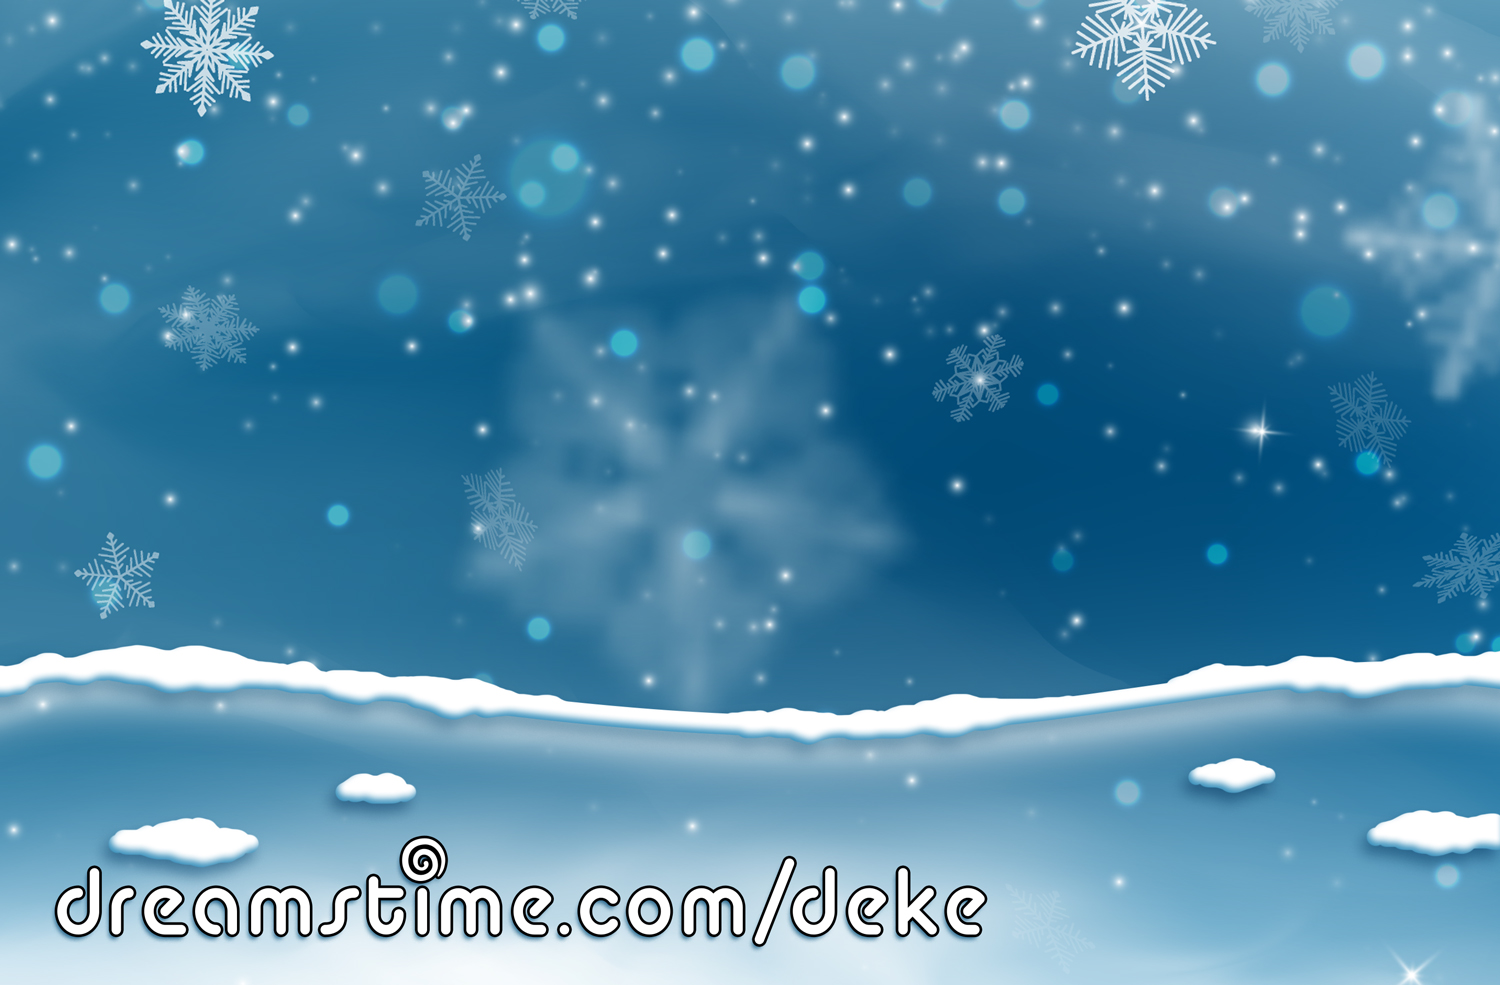 A stylized blue and white snow scene from Dreamstime.com